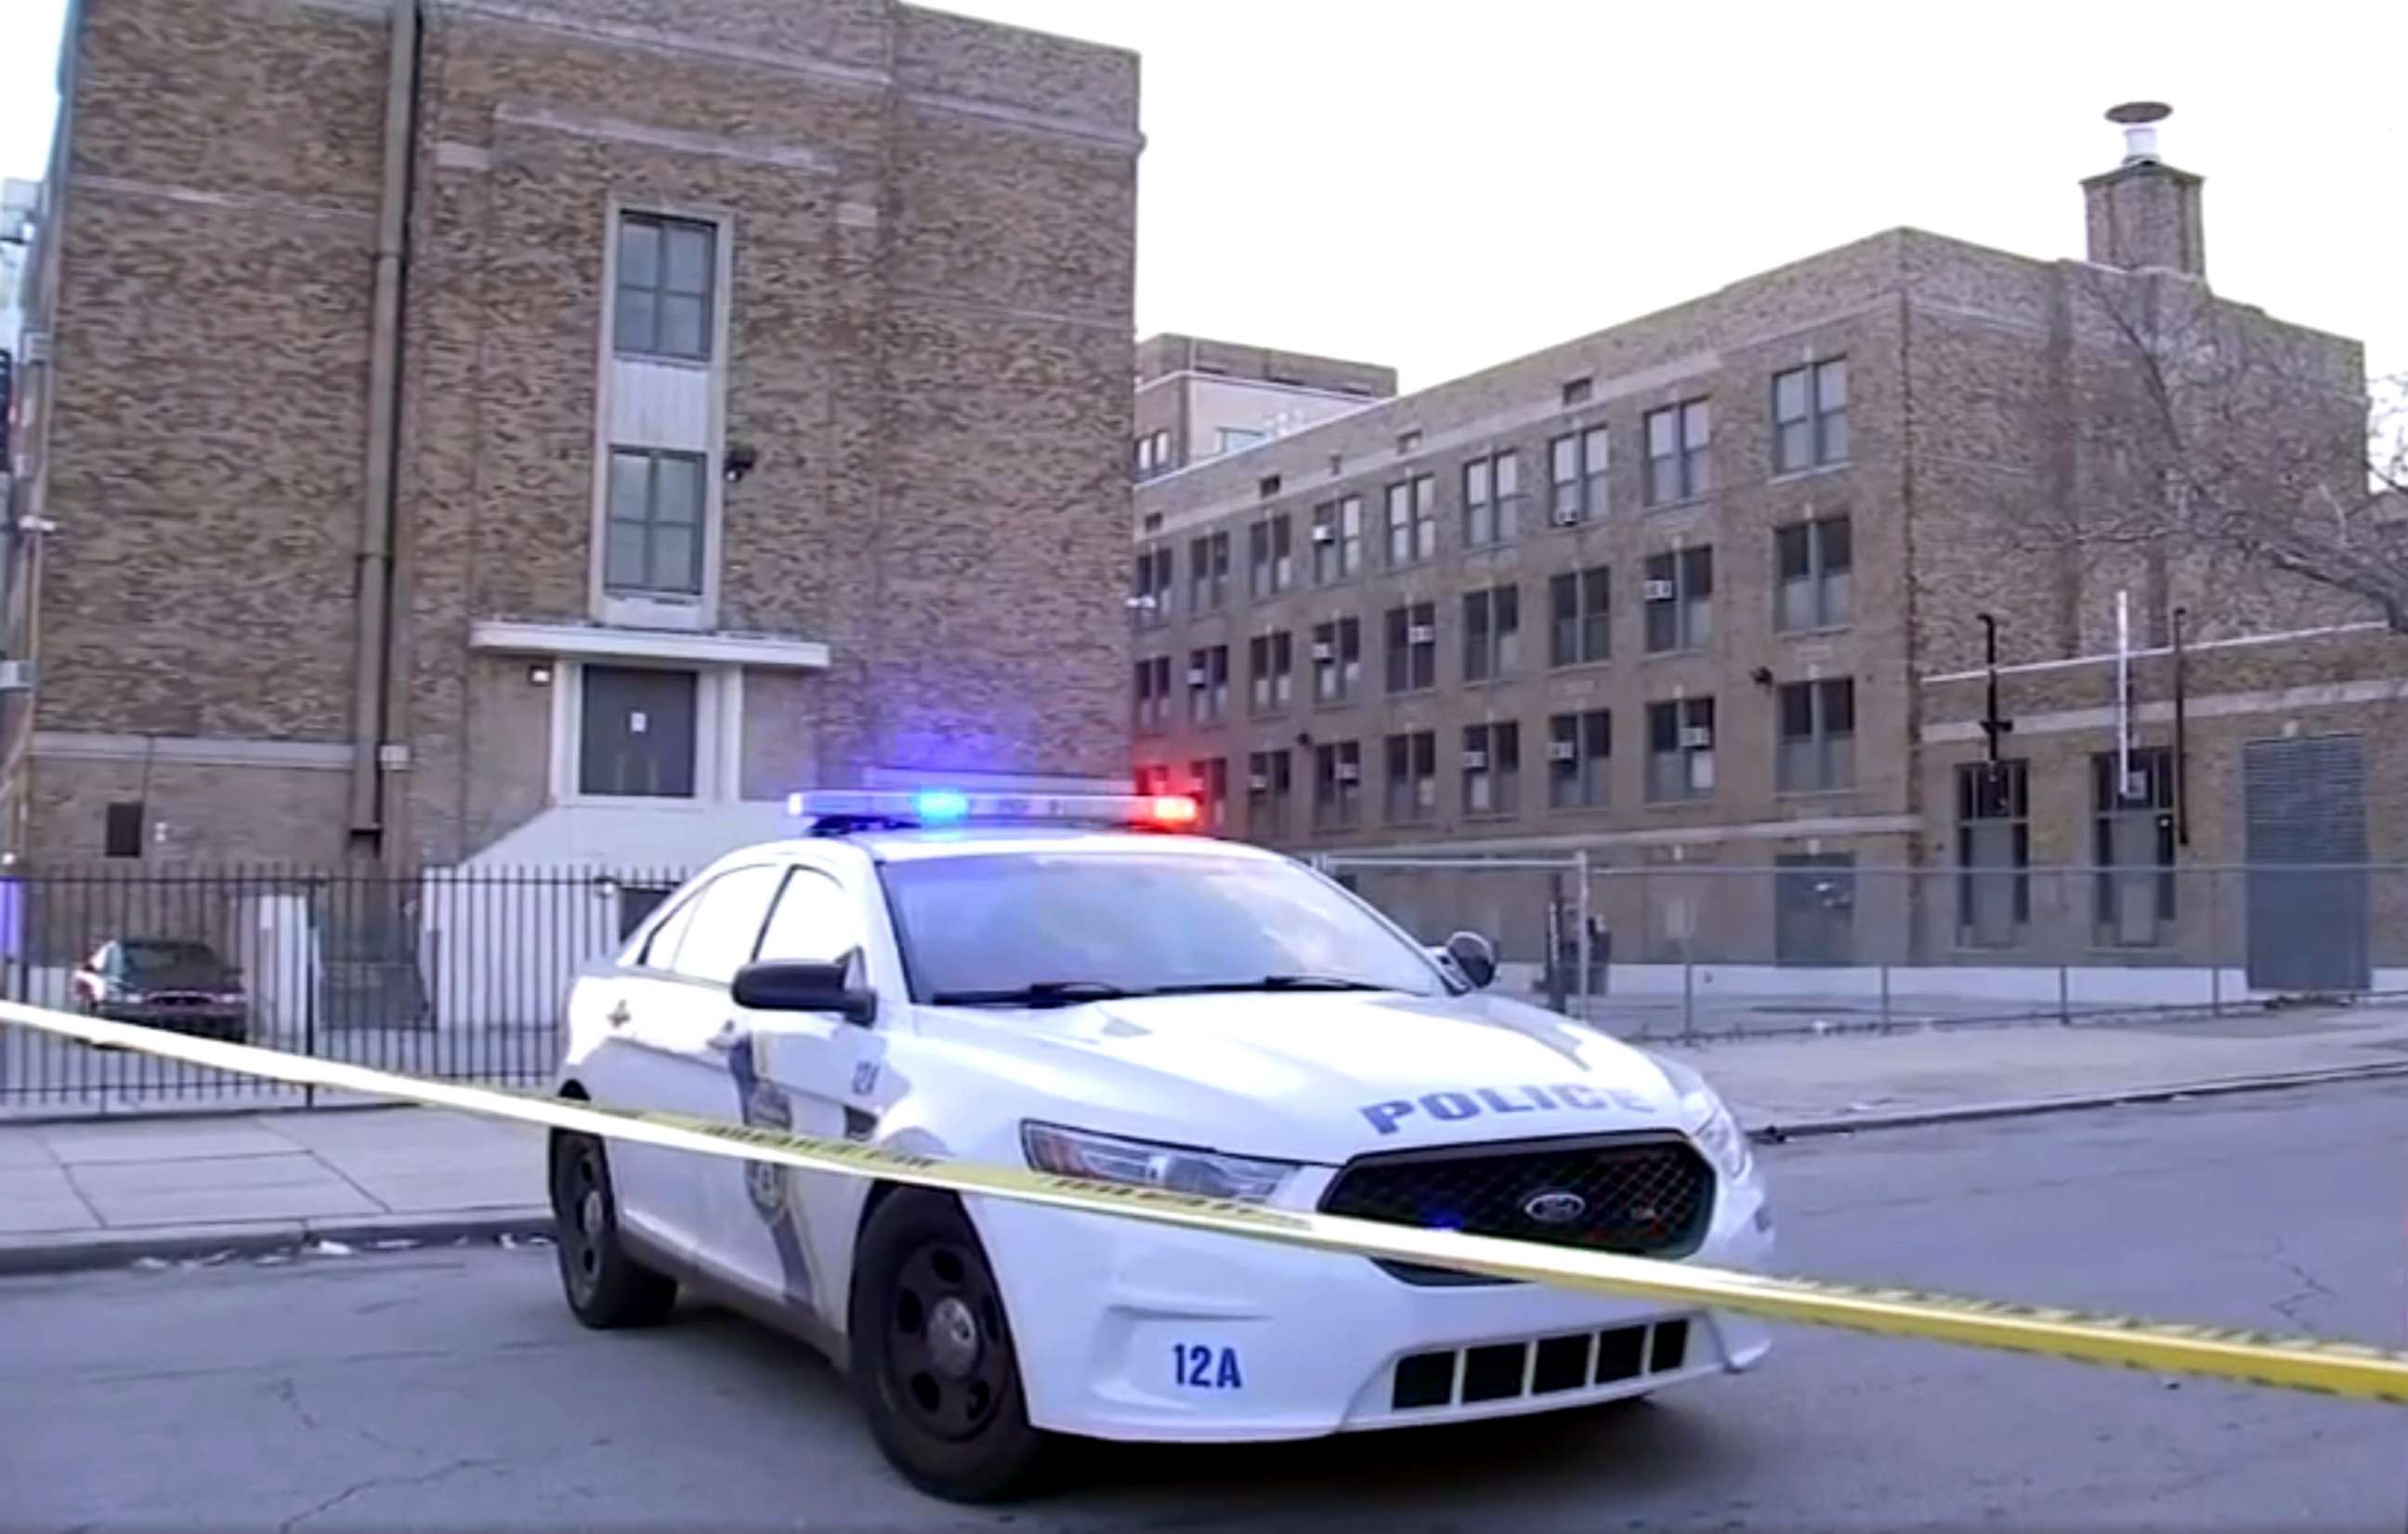 PHOTO: A 17-year-old student was fatally shot Wednesday afternoon, Jan. 26, 2022 outside outside Bartram High School in Southwest Philadelphia, Penn.